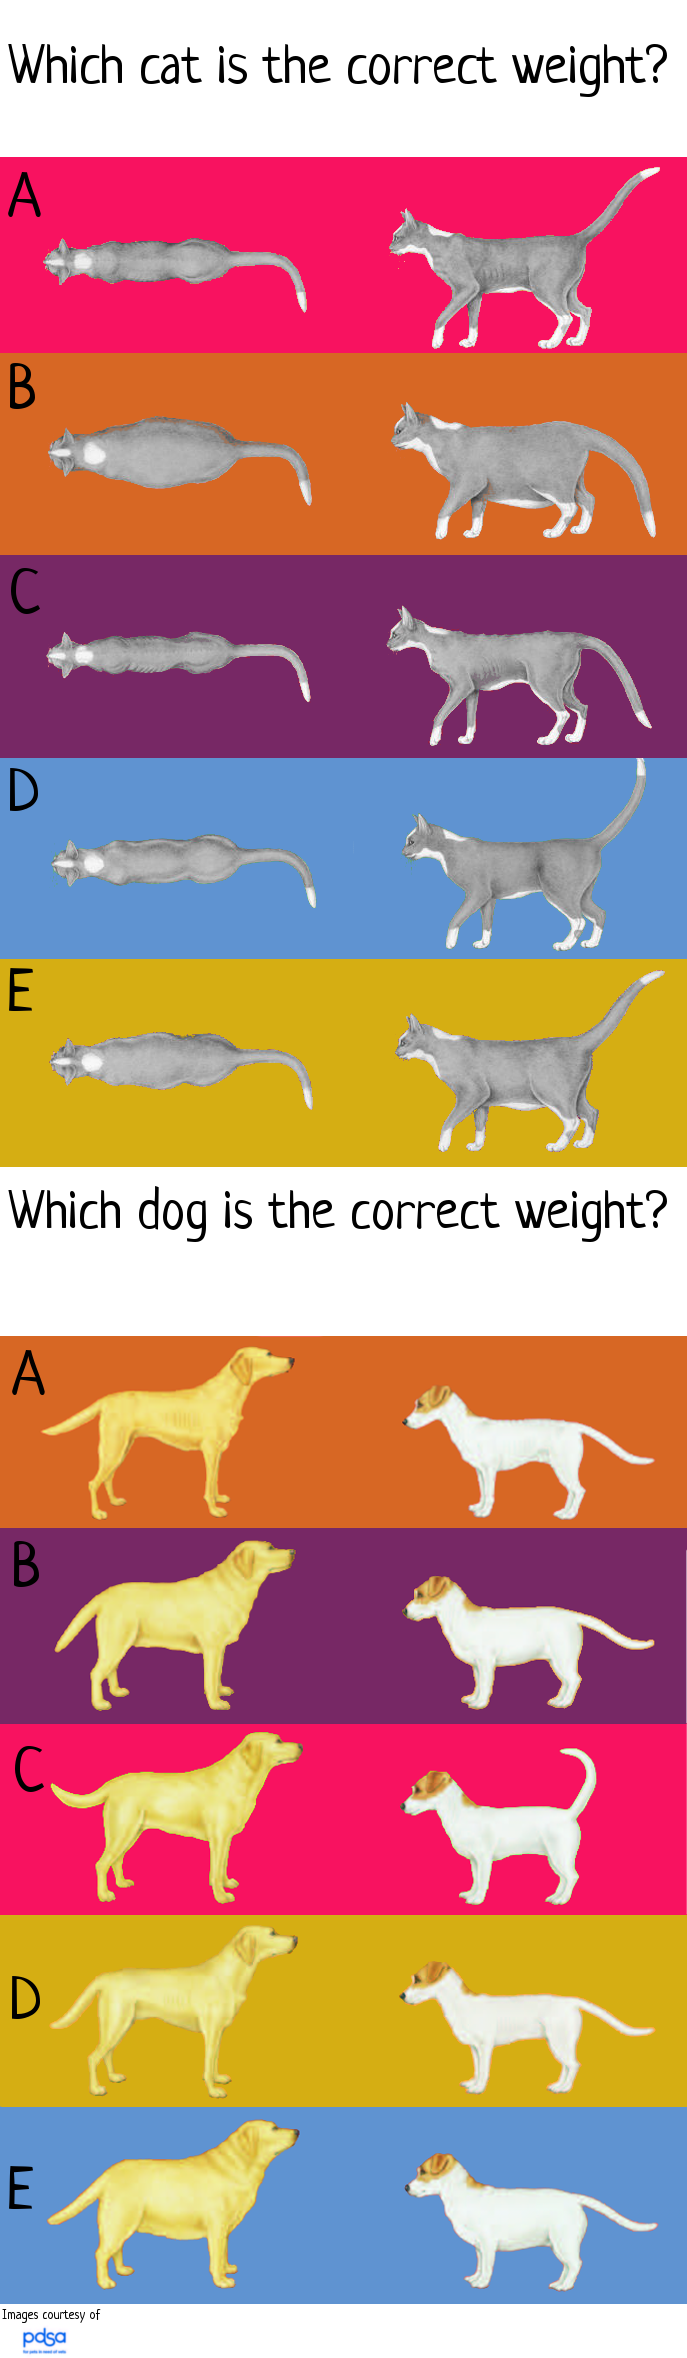 cat and dog weight quiz